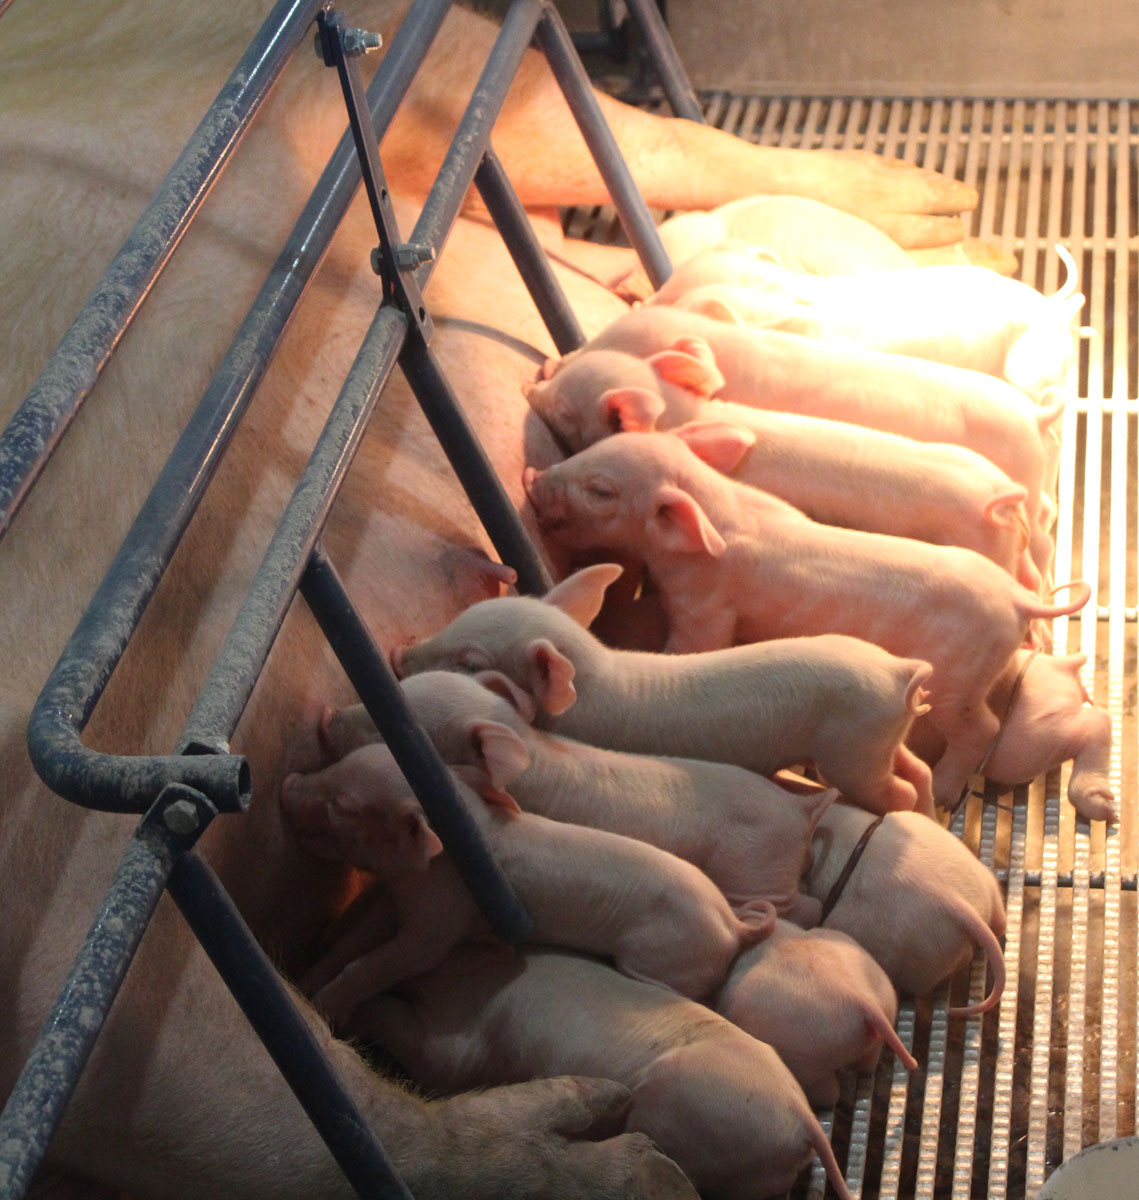 Hog Slat farrowing crates are designed to create a protective setting for farrowing sows and their new-born piglets, creating an ideal environment for litters to easily nurse, rest and maximize litter survivability.